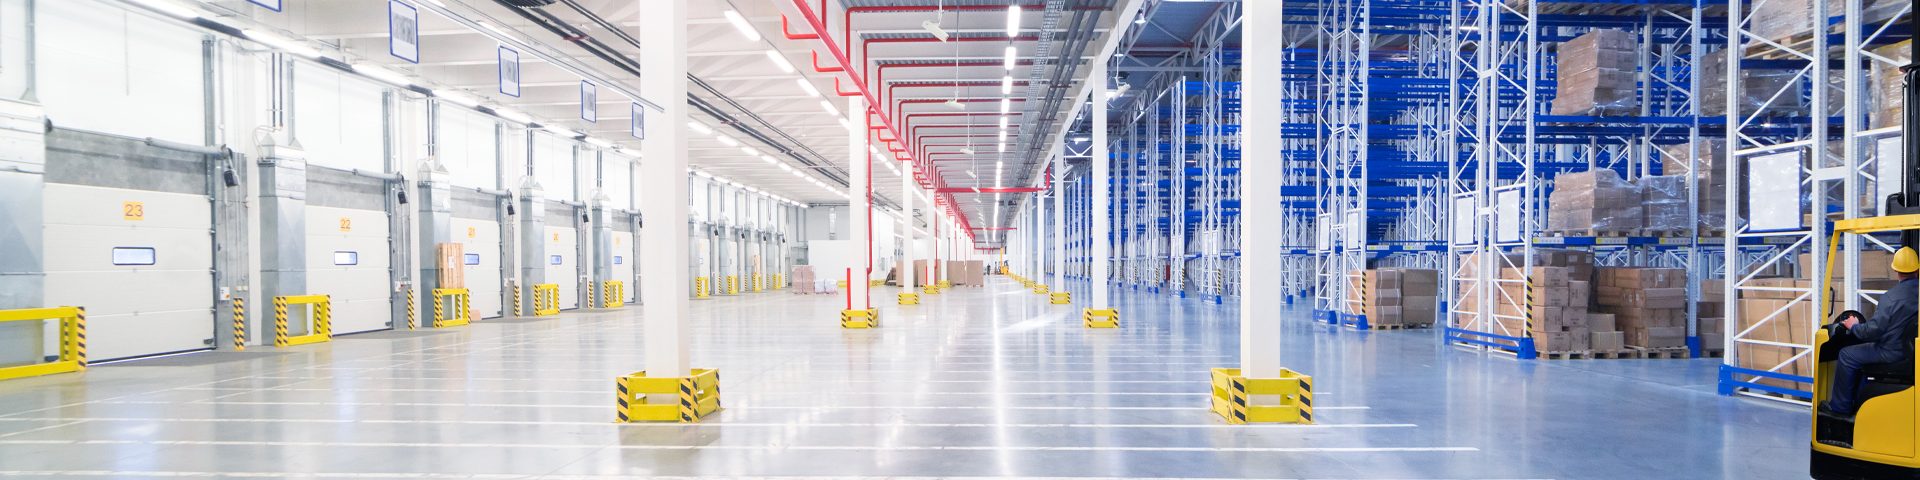 What Are The Different Types Of Industrial Flooring Coatings?